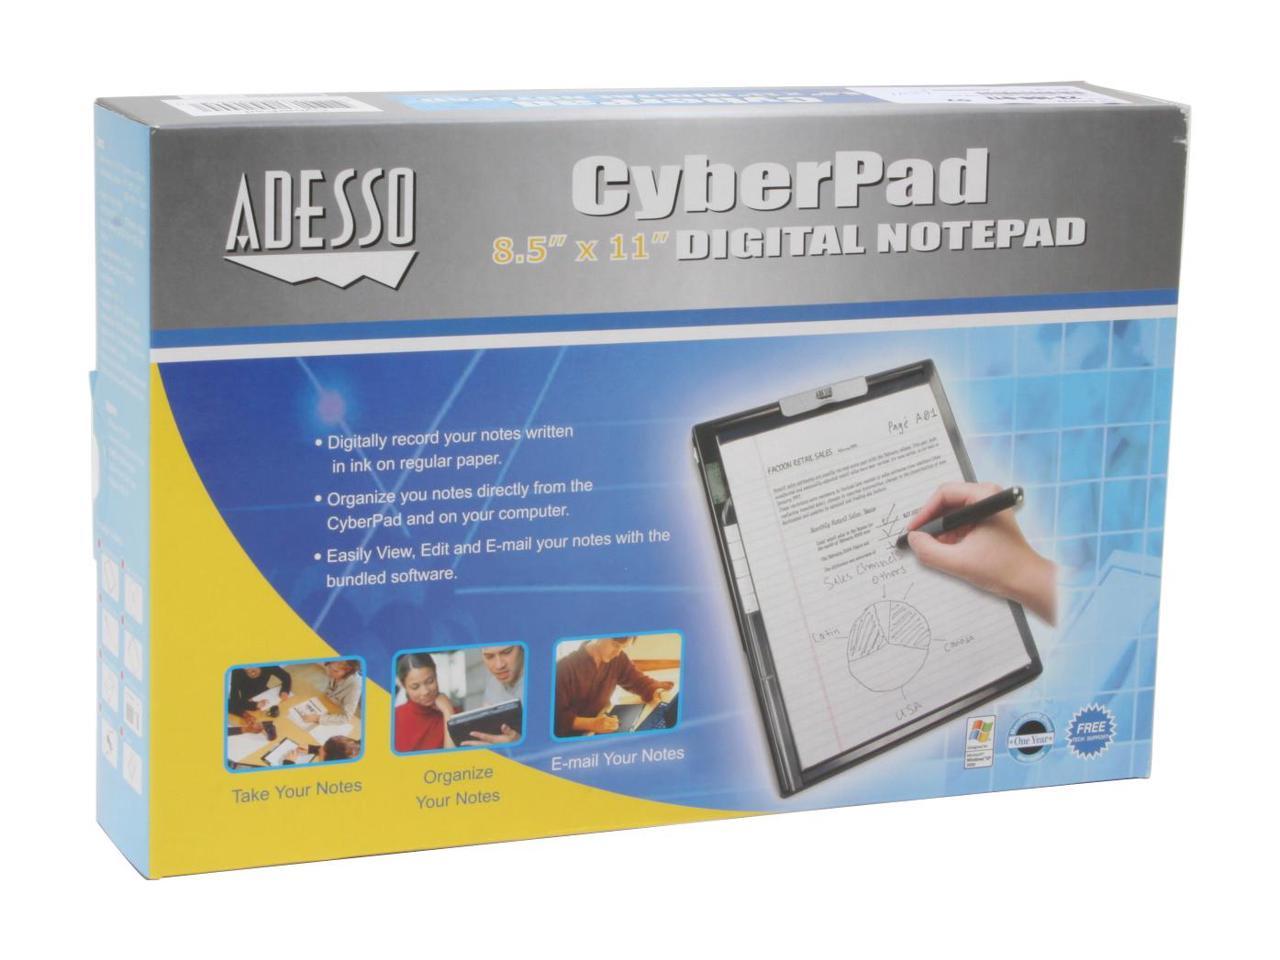 adesso cyberpad software download